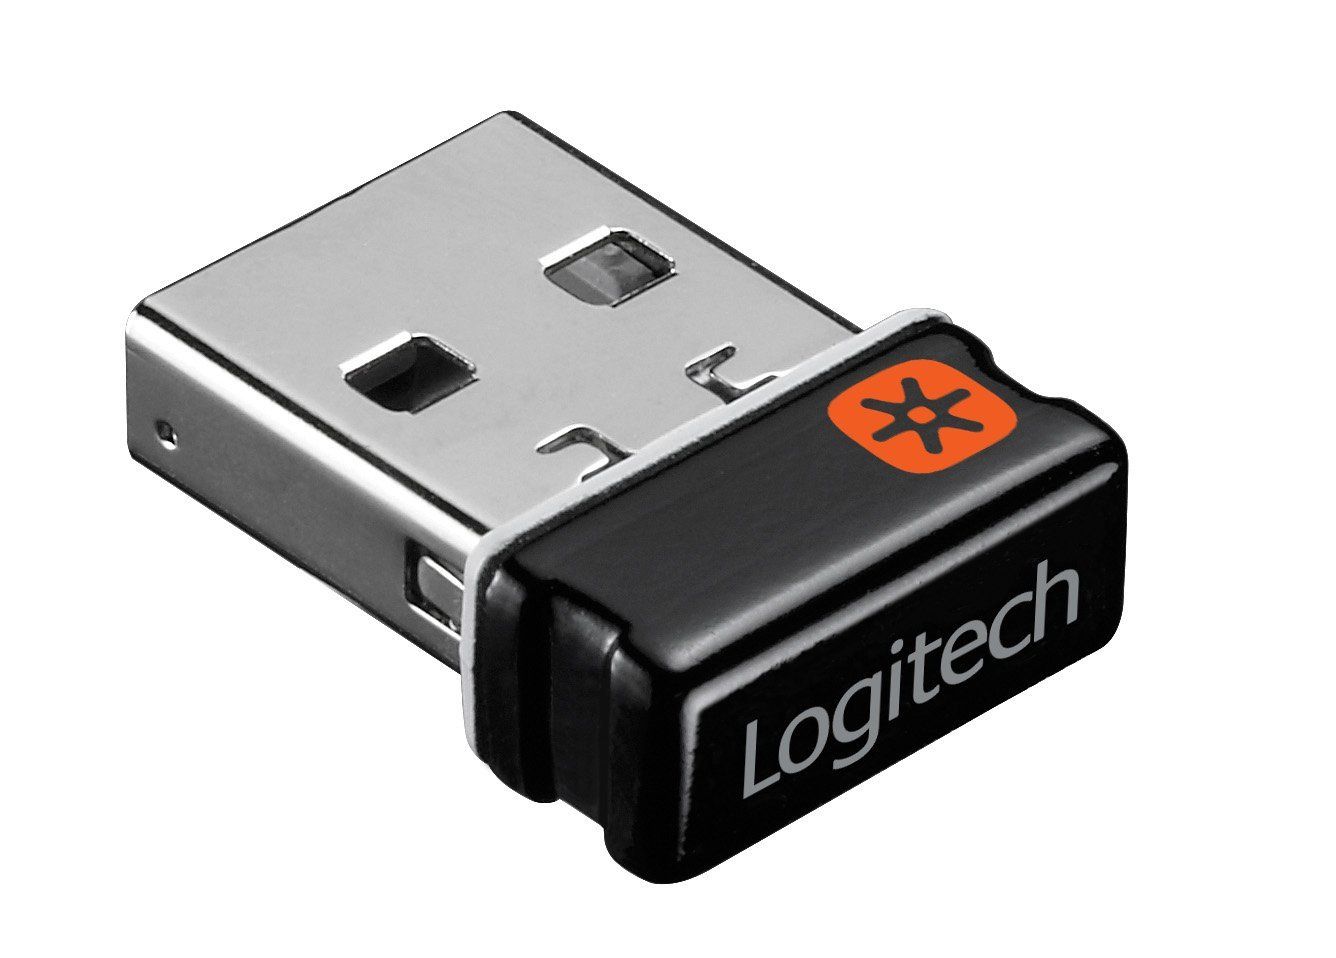 Logitech receiver for mouse and keyboard